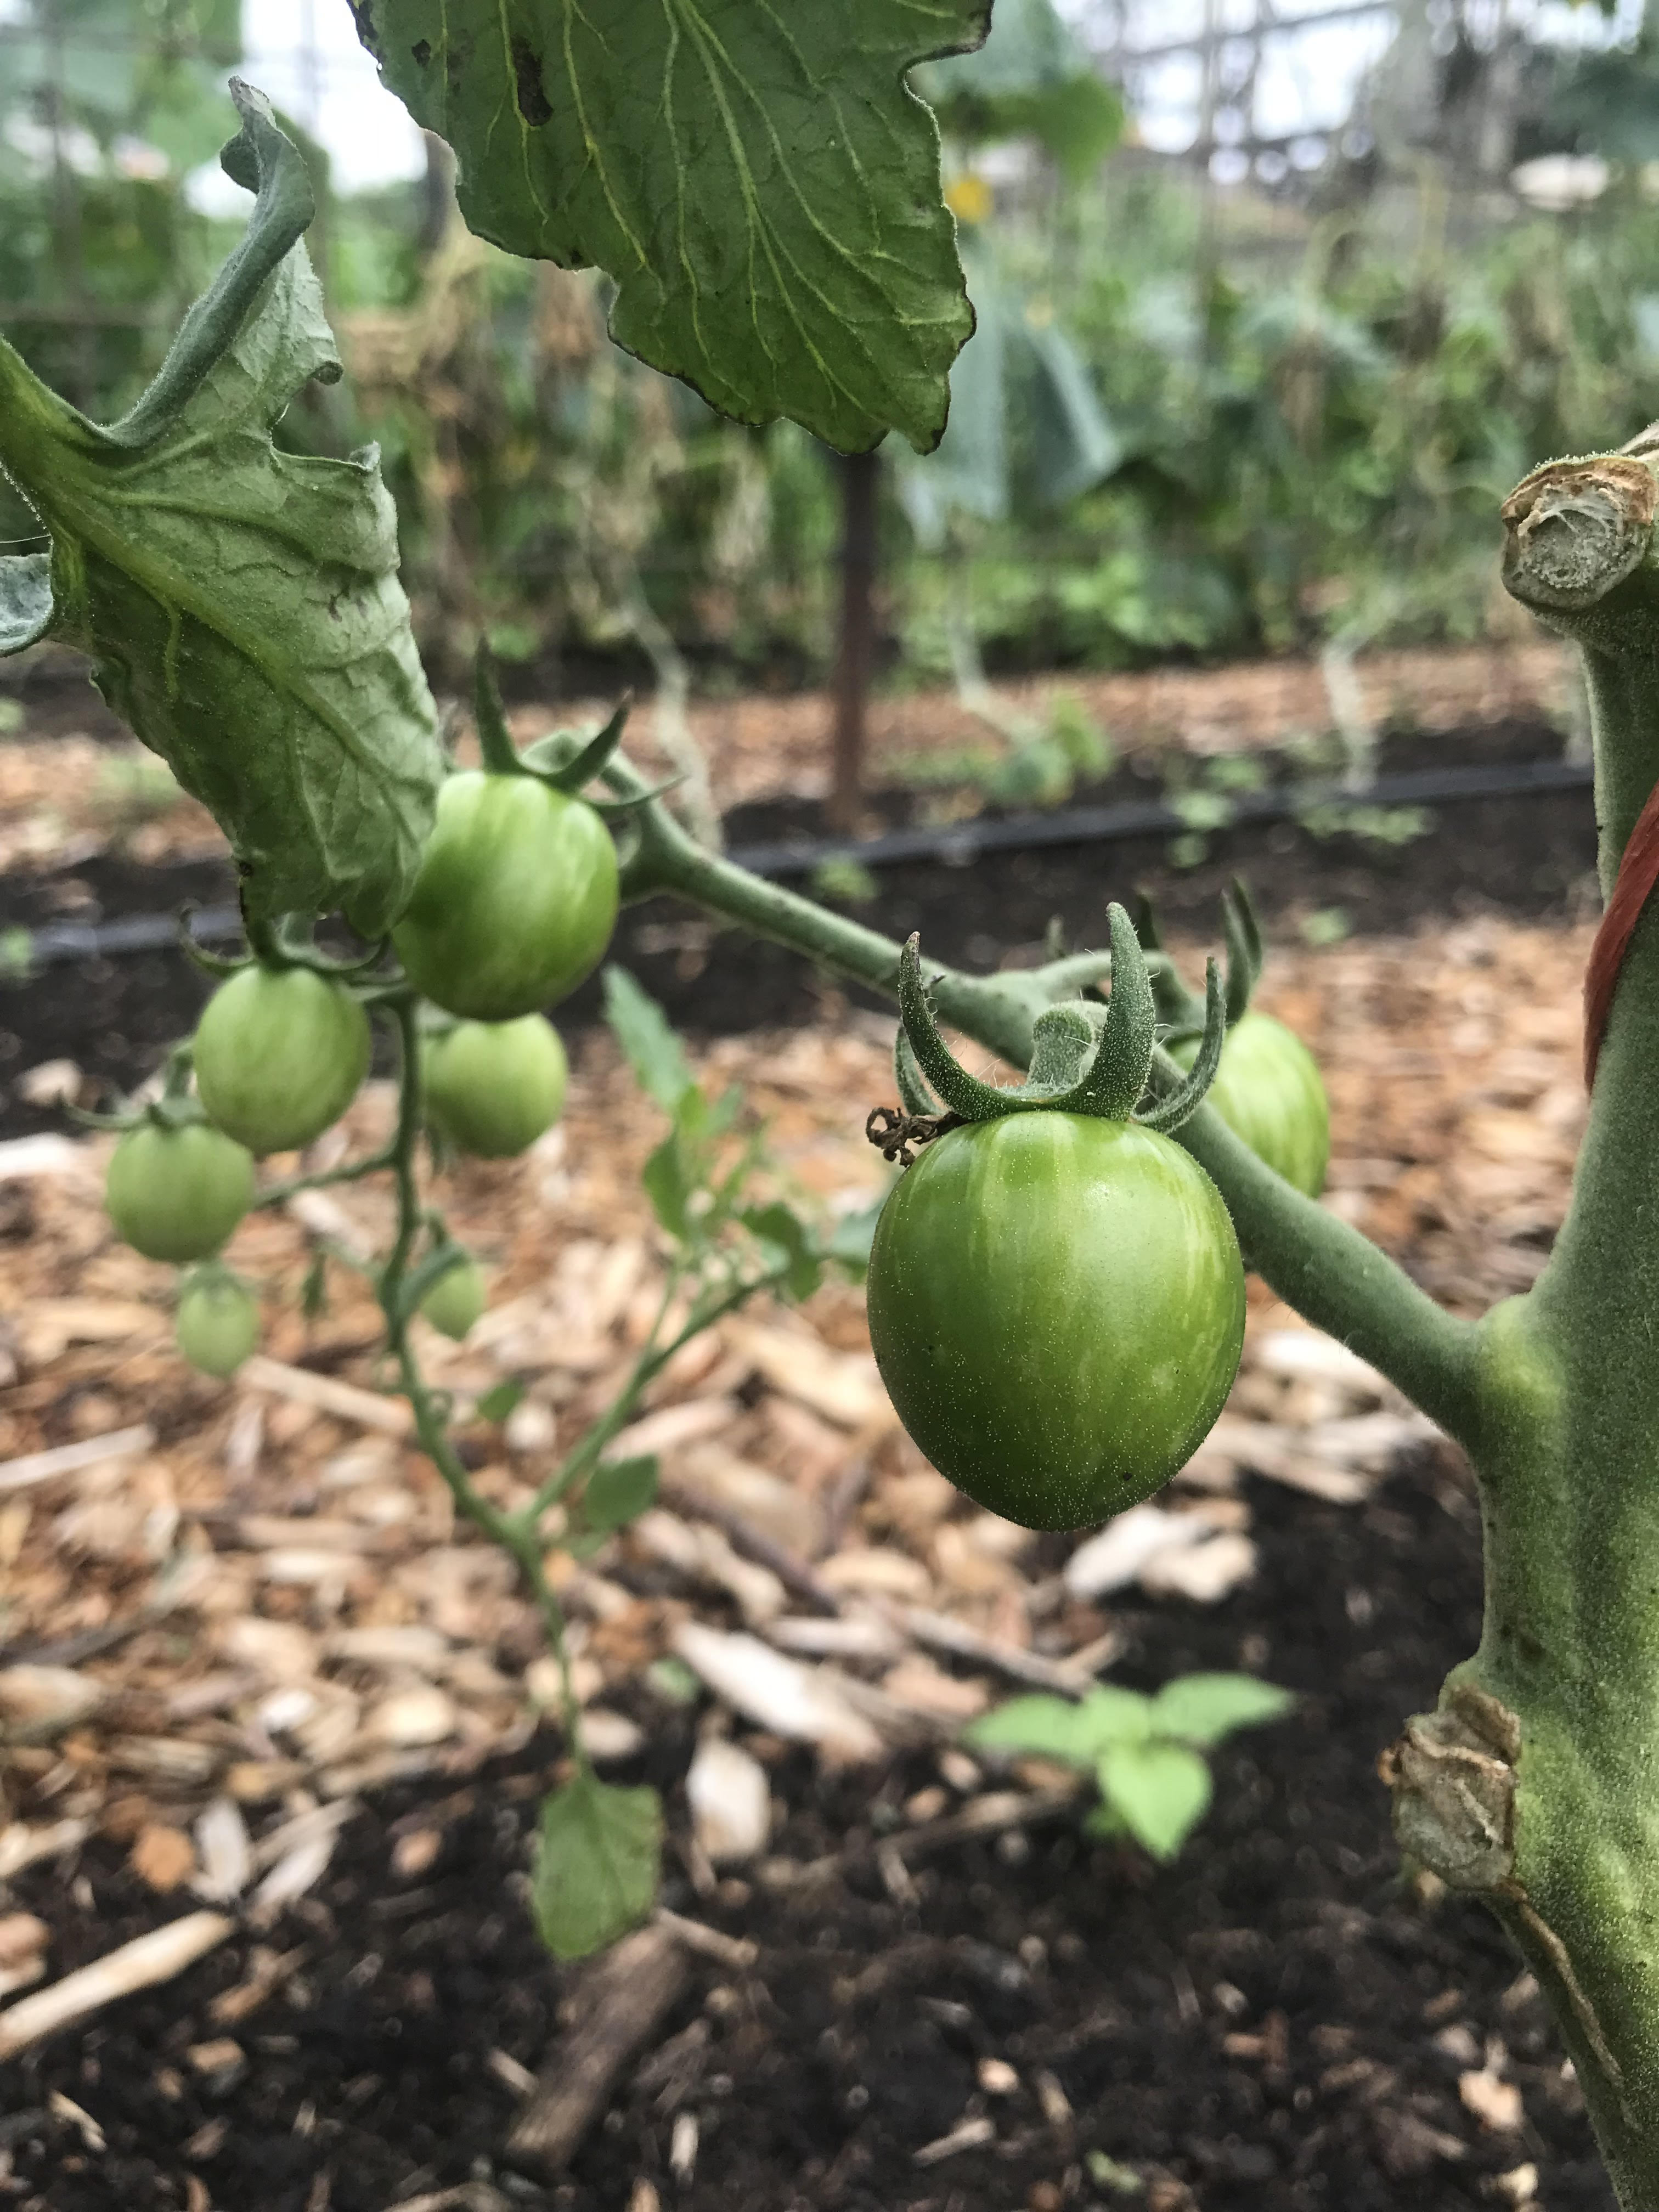 A close up of a green tomato, not yet ripe, on the vine at the Humbleweed Farm. There is an outdoor farm with yellowed grass and green onion plants shooting up in rows with a bright blue sky in the background. Photo by Humbleweed Farm.